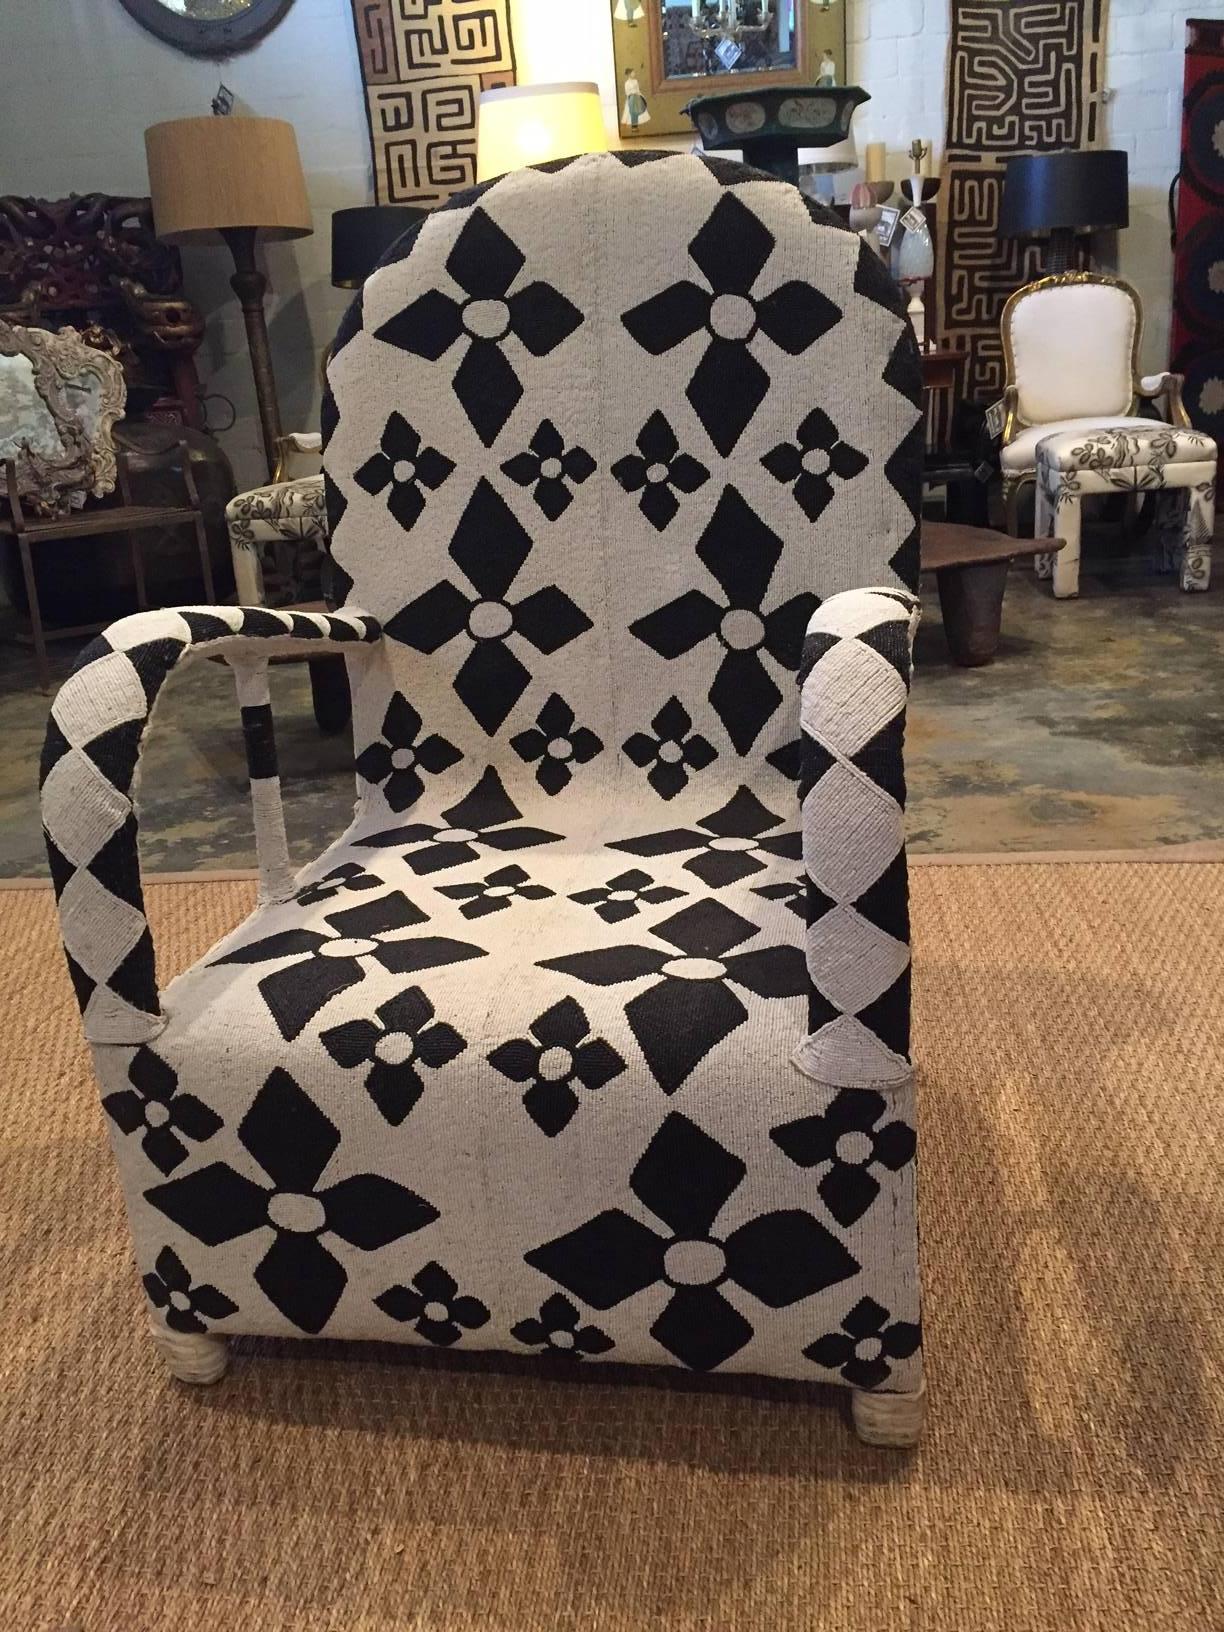 Pair of lounge chairs from Africa
Black and white.